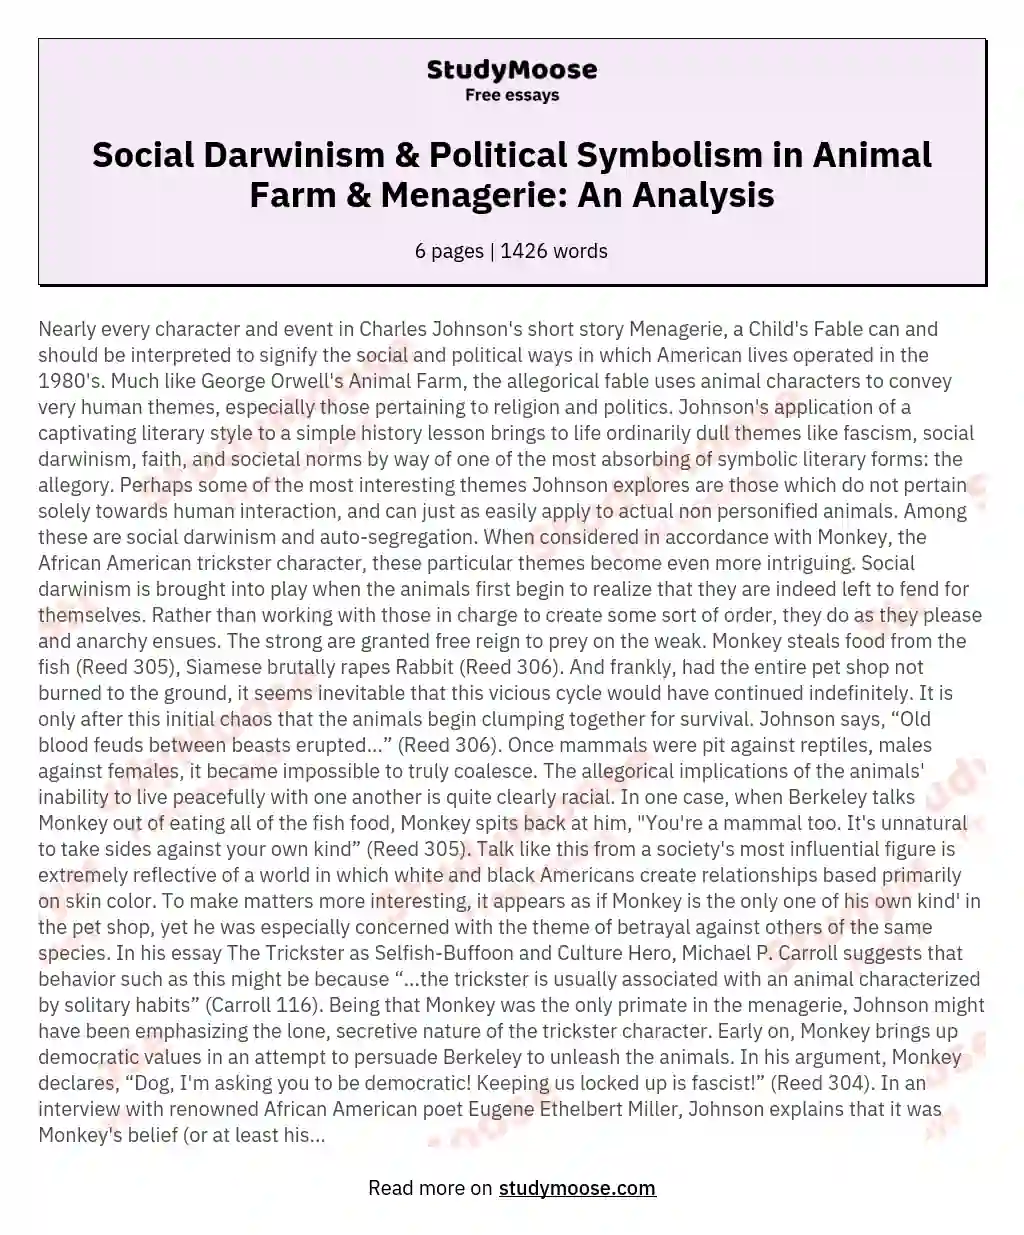 Social Darwinism, Auto-Segregation and Political Symbolism in George Orwell's Novel "Animal Farm" and Charles Johnson's "Menagerie, a Child Fable"